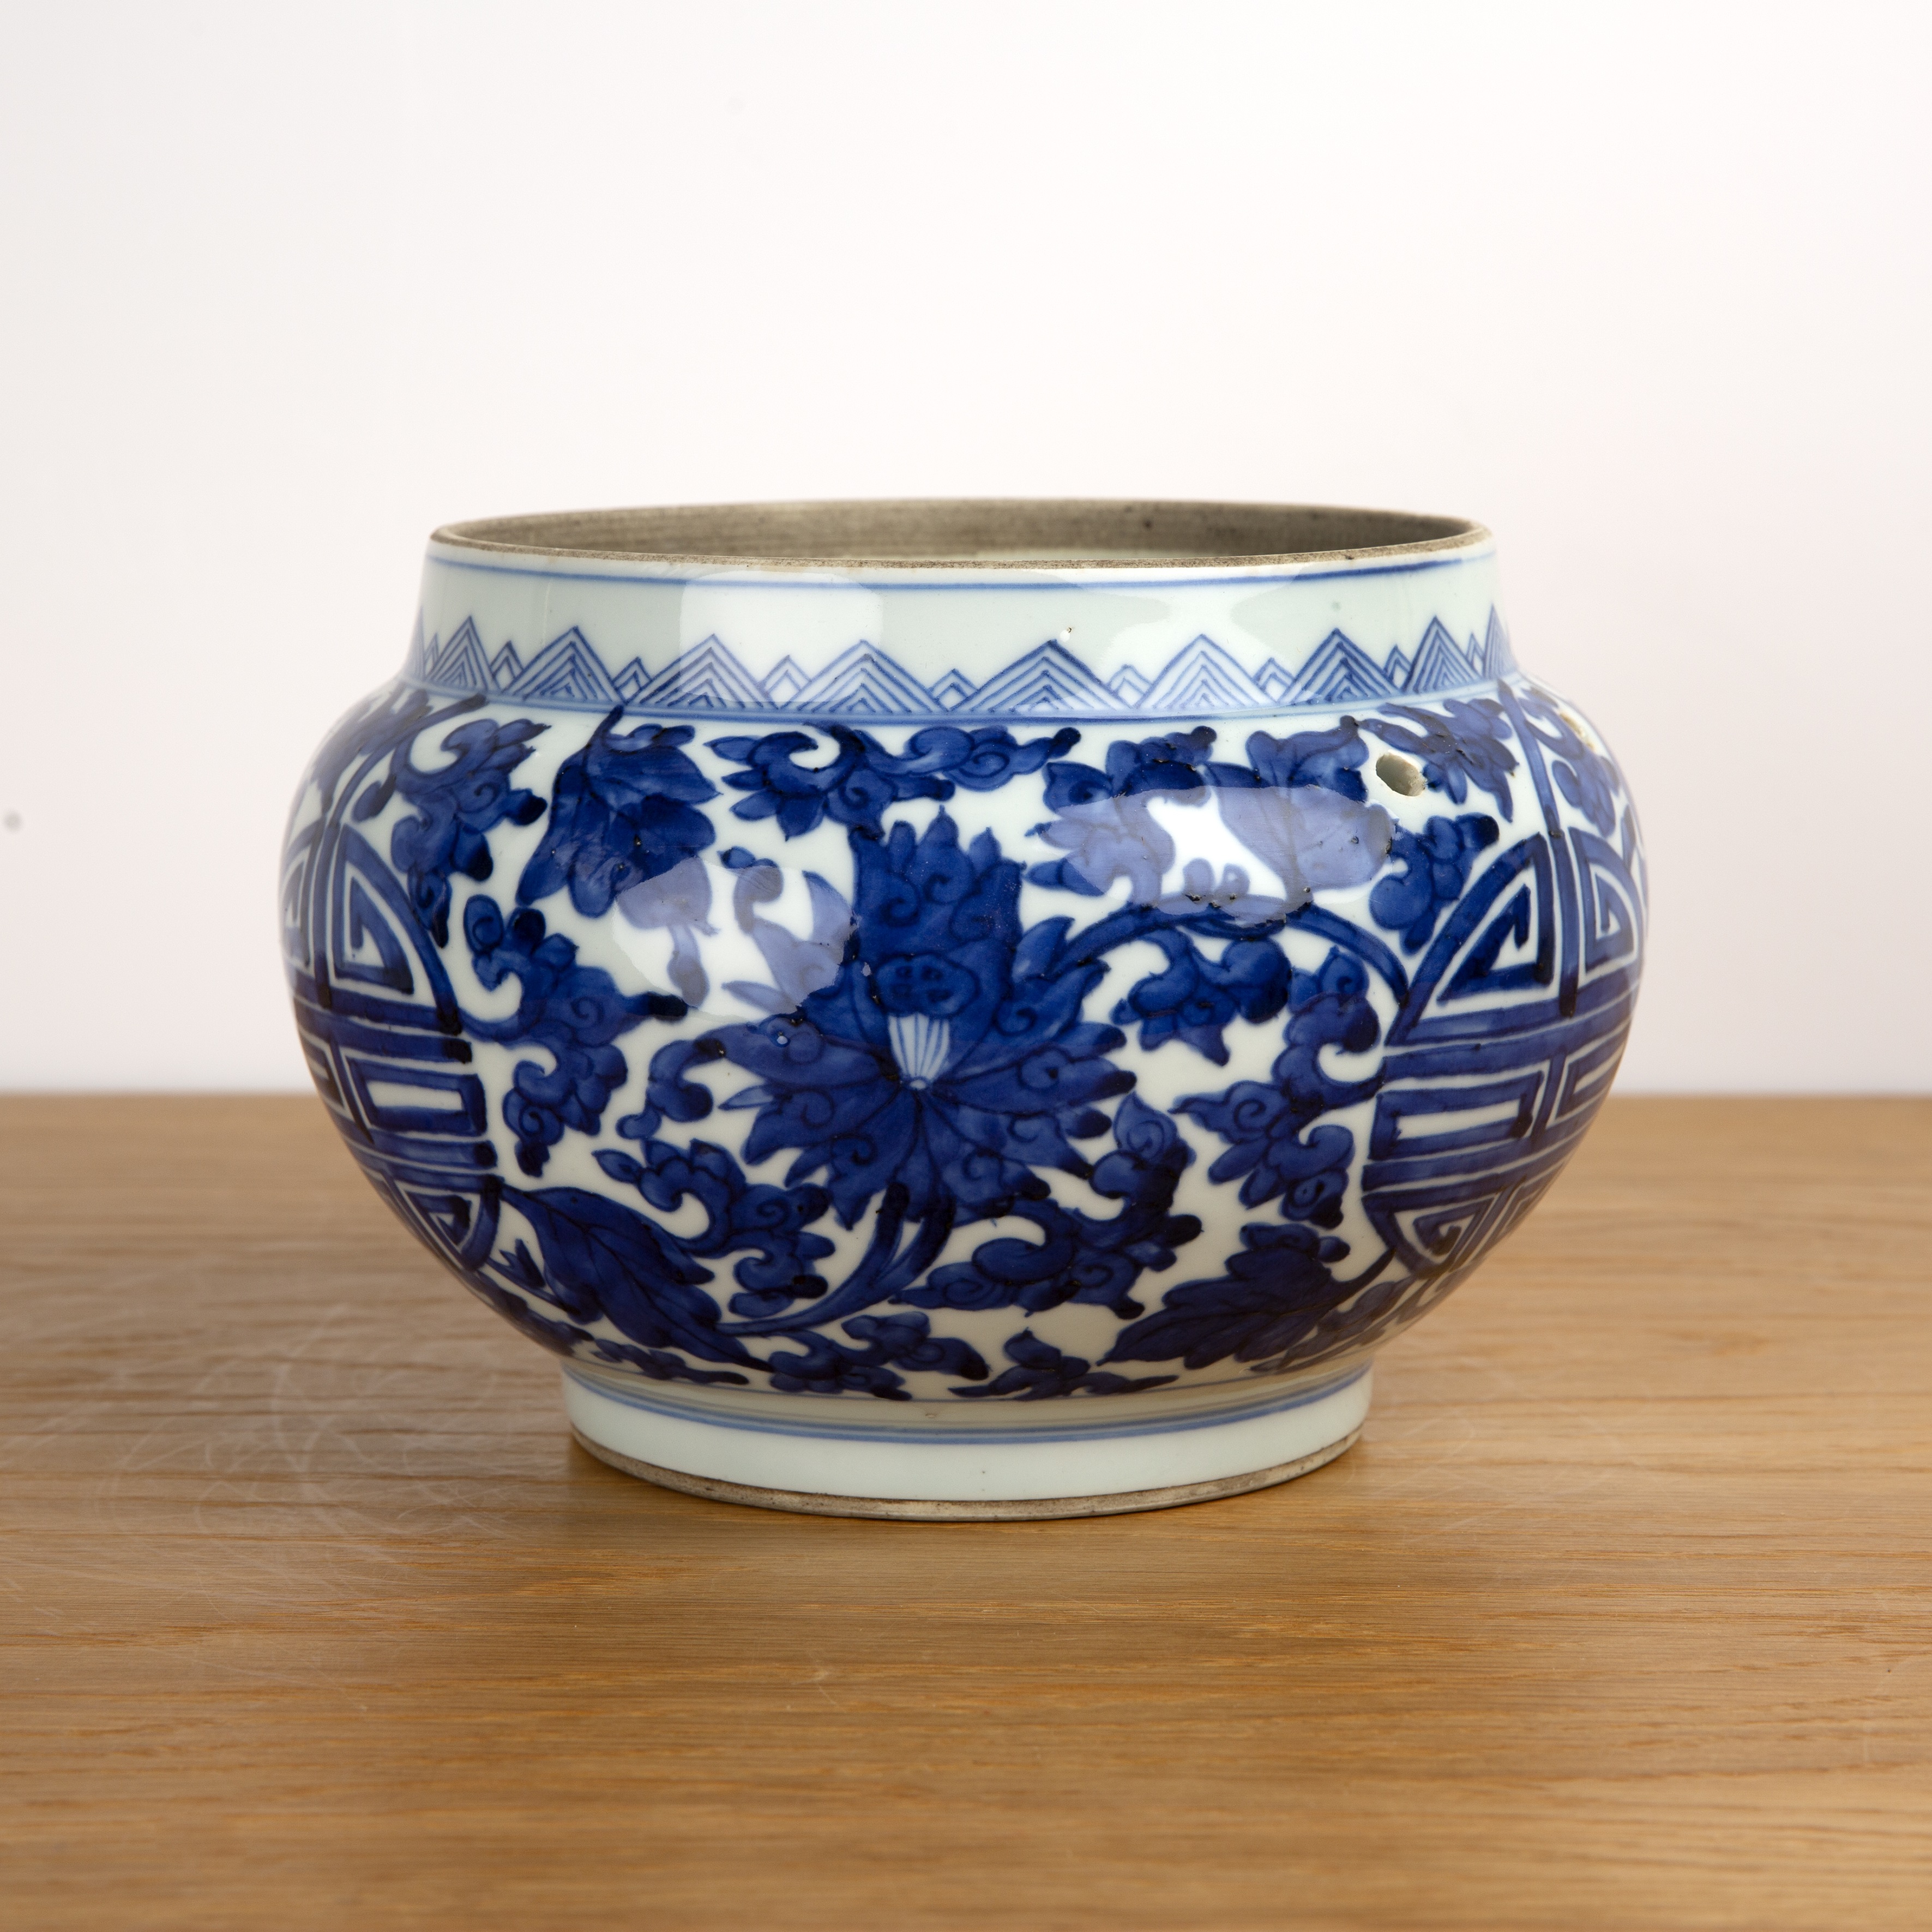 Blue and white porcelain bowl Chinese, 18th Century with original pierced holes for the handles, - Image 2 of 4